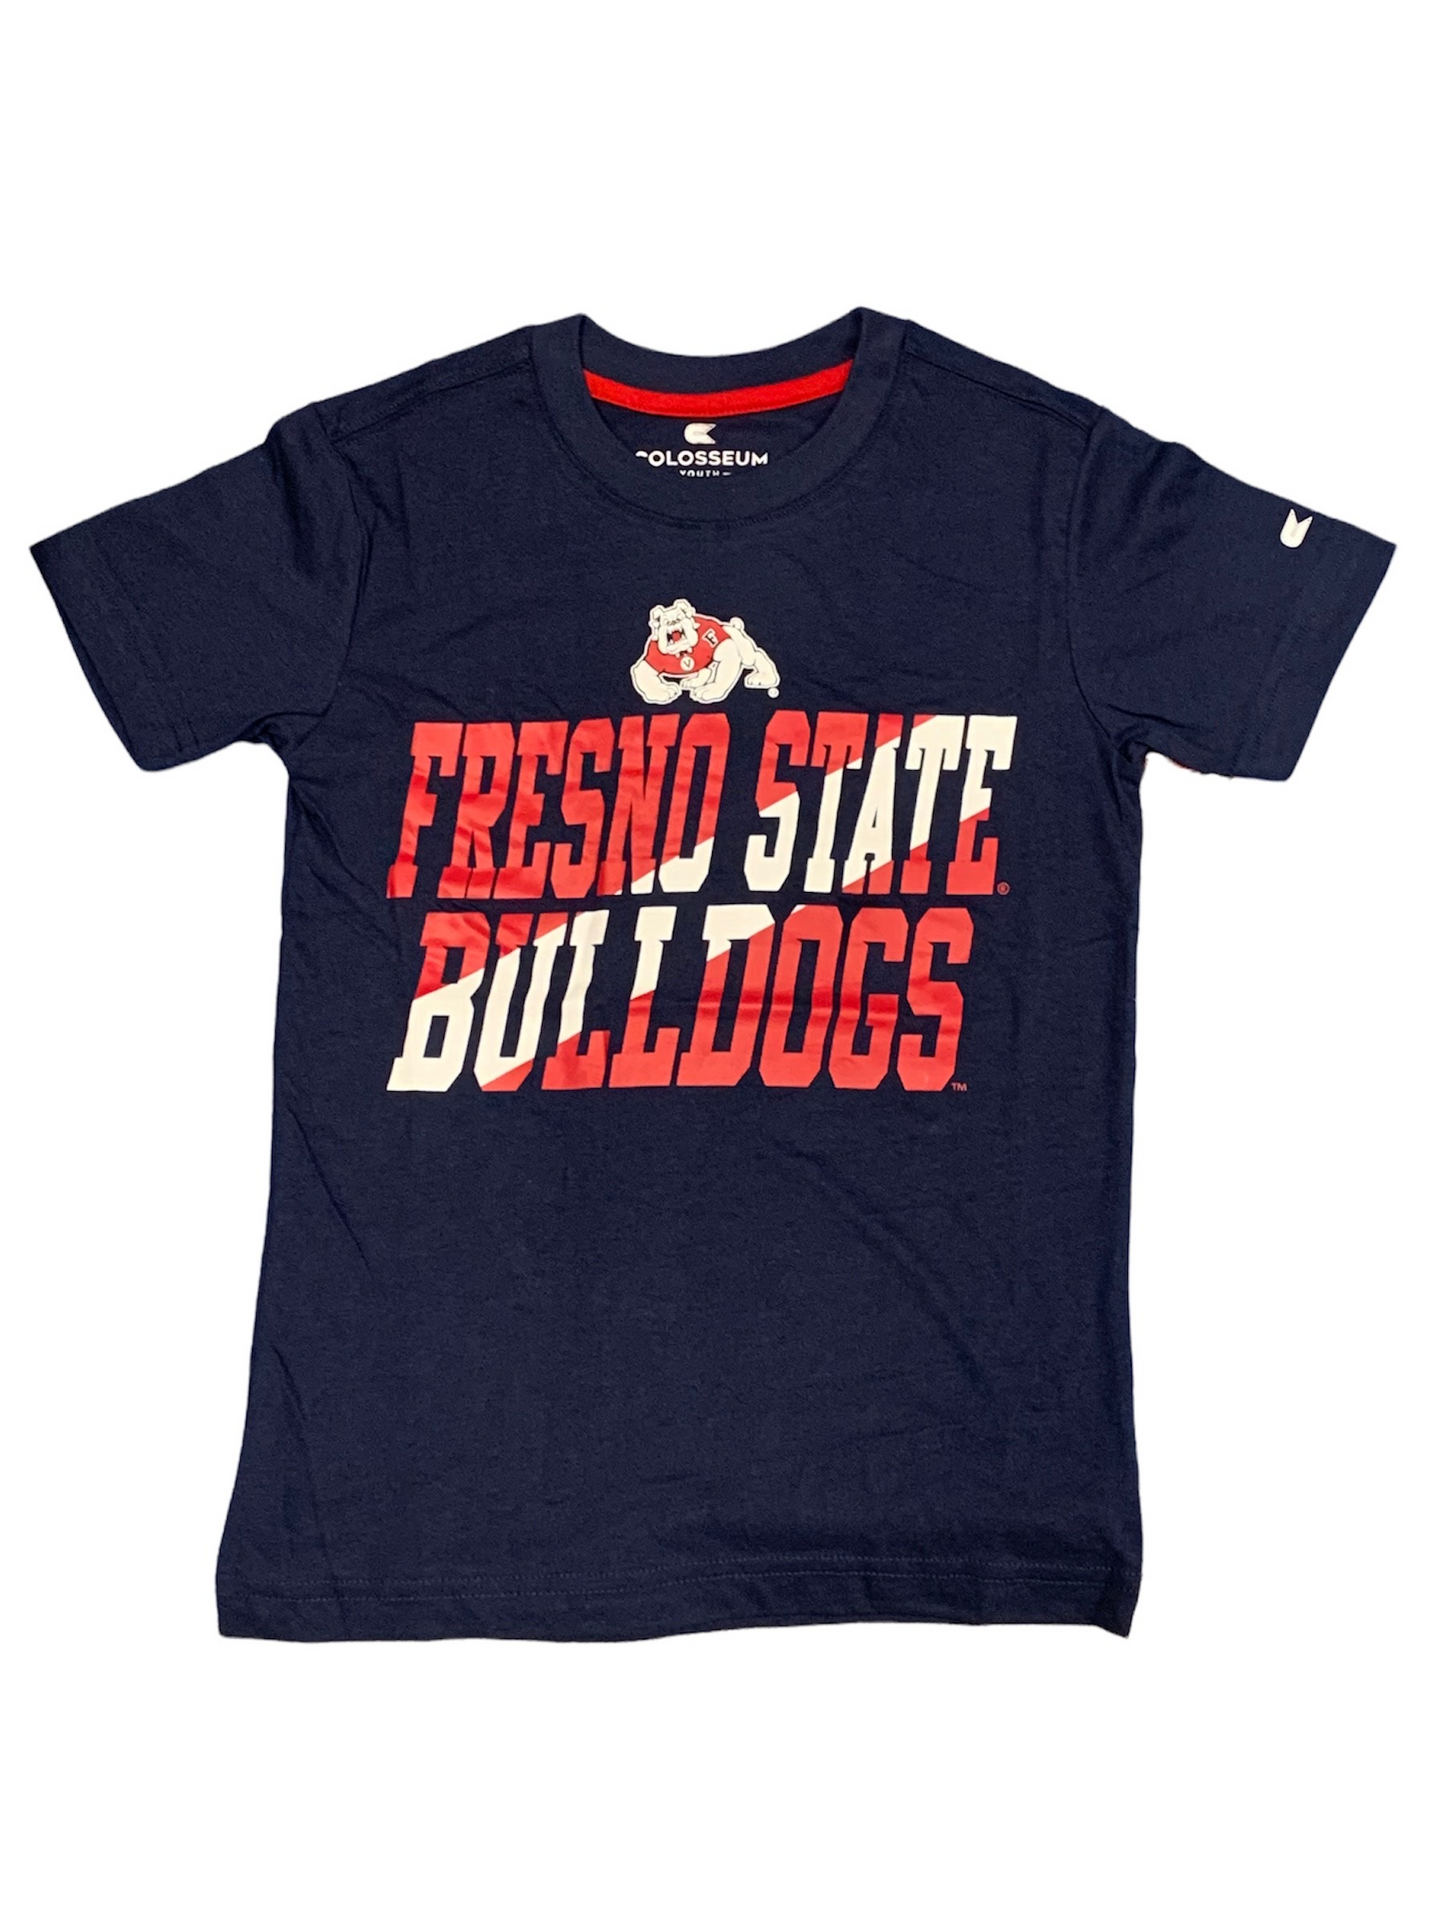 FRESNO STATE BULLDOGS YOUTH TRI-COLOR TEE